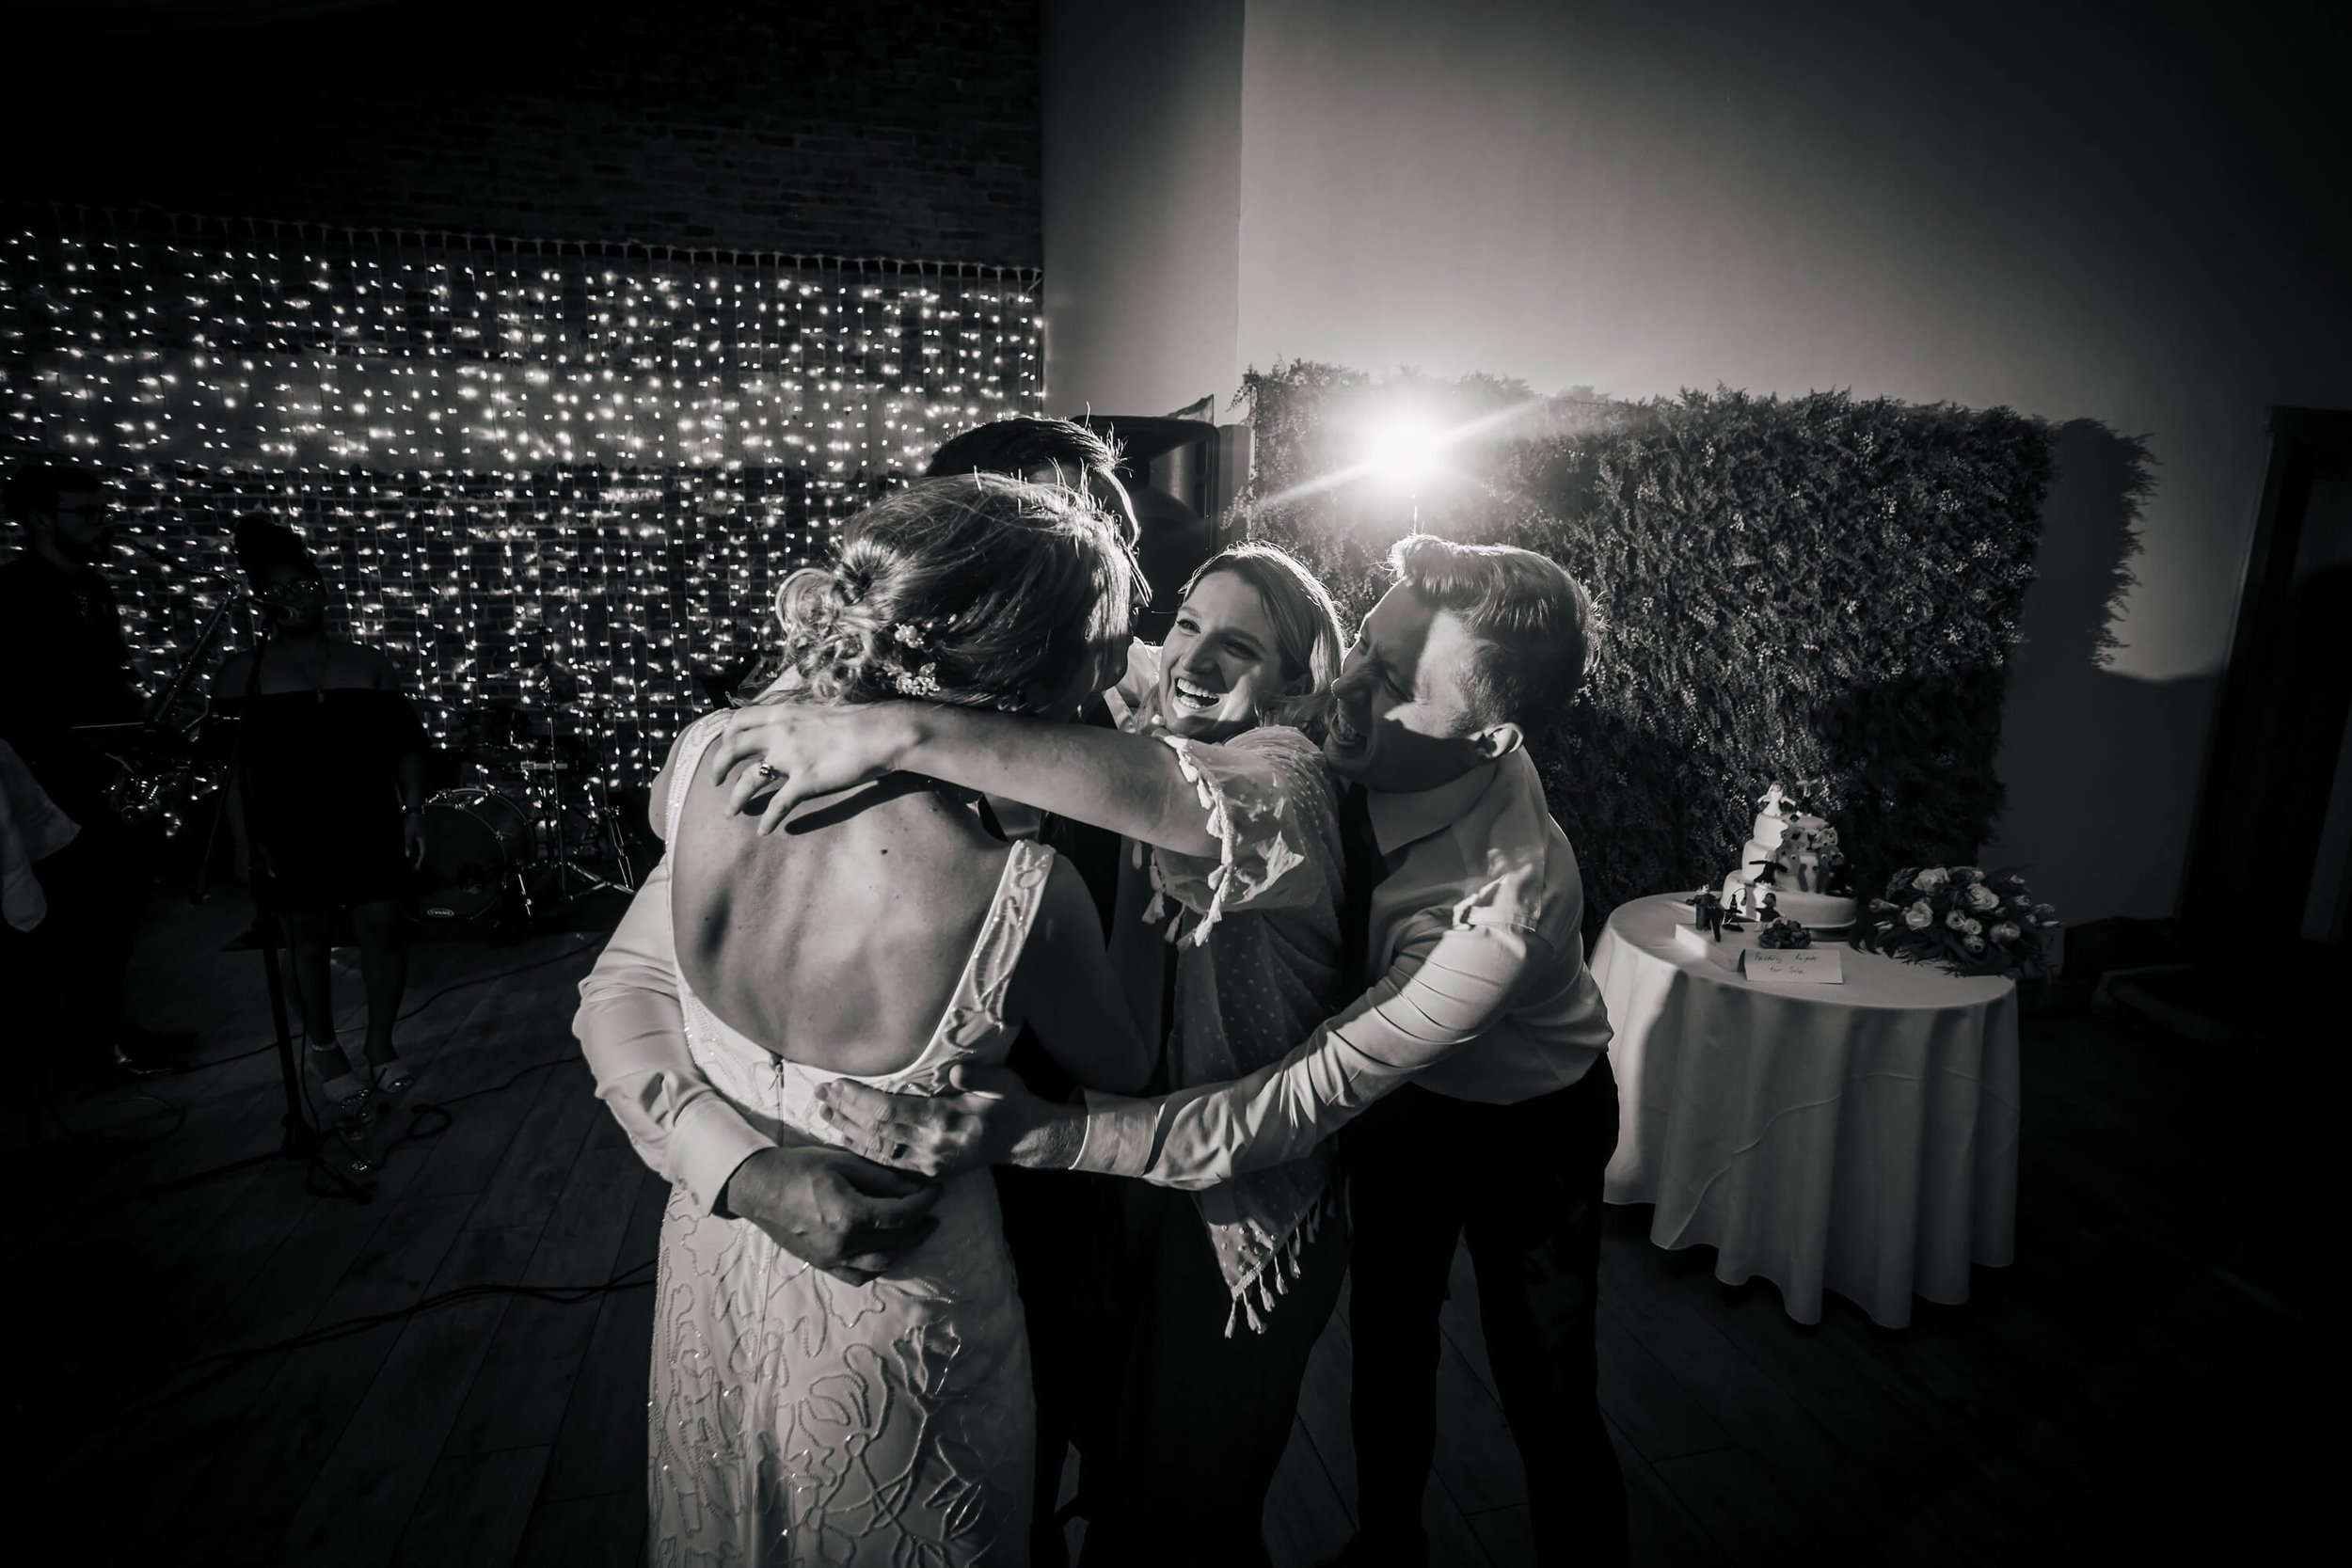 Wedding guests group hug at a wedding in the evening